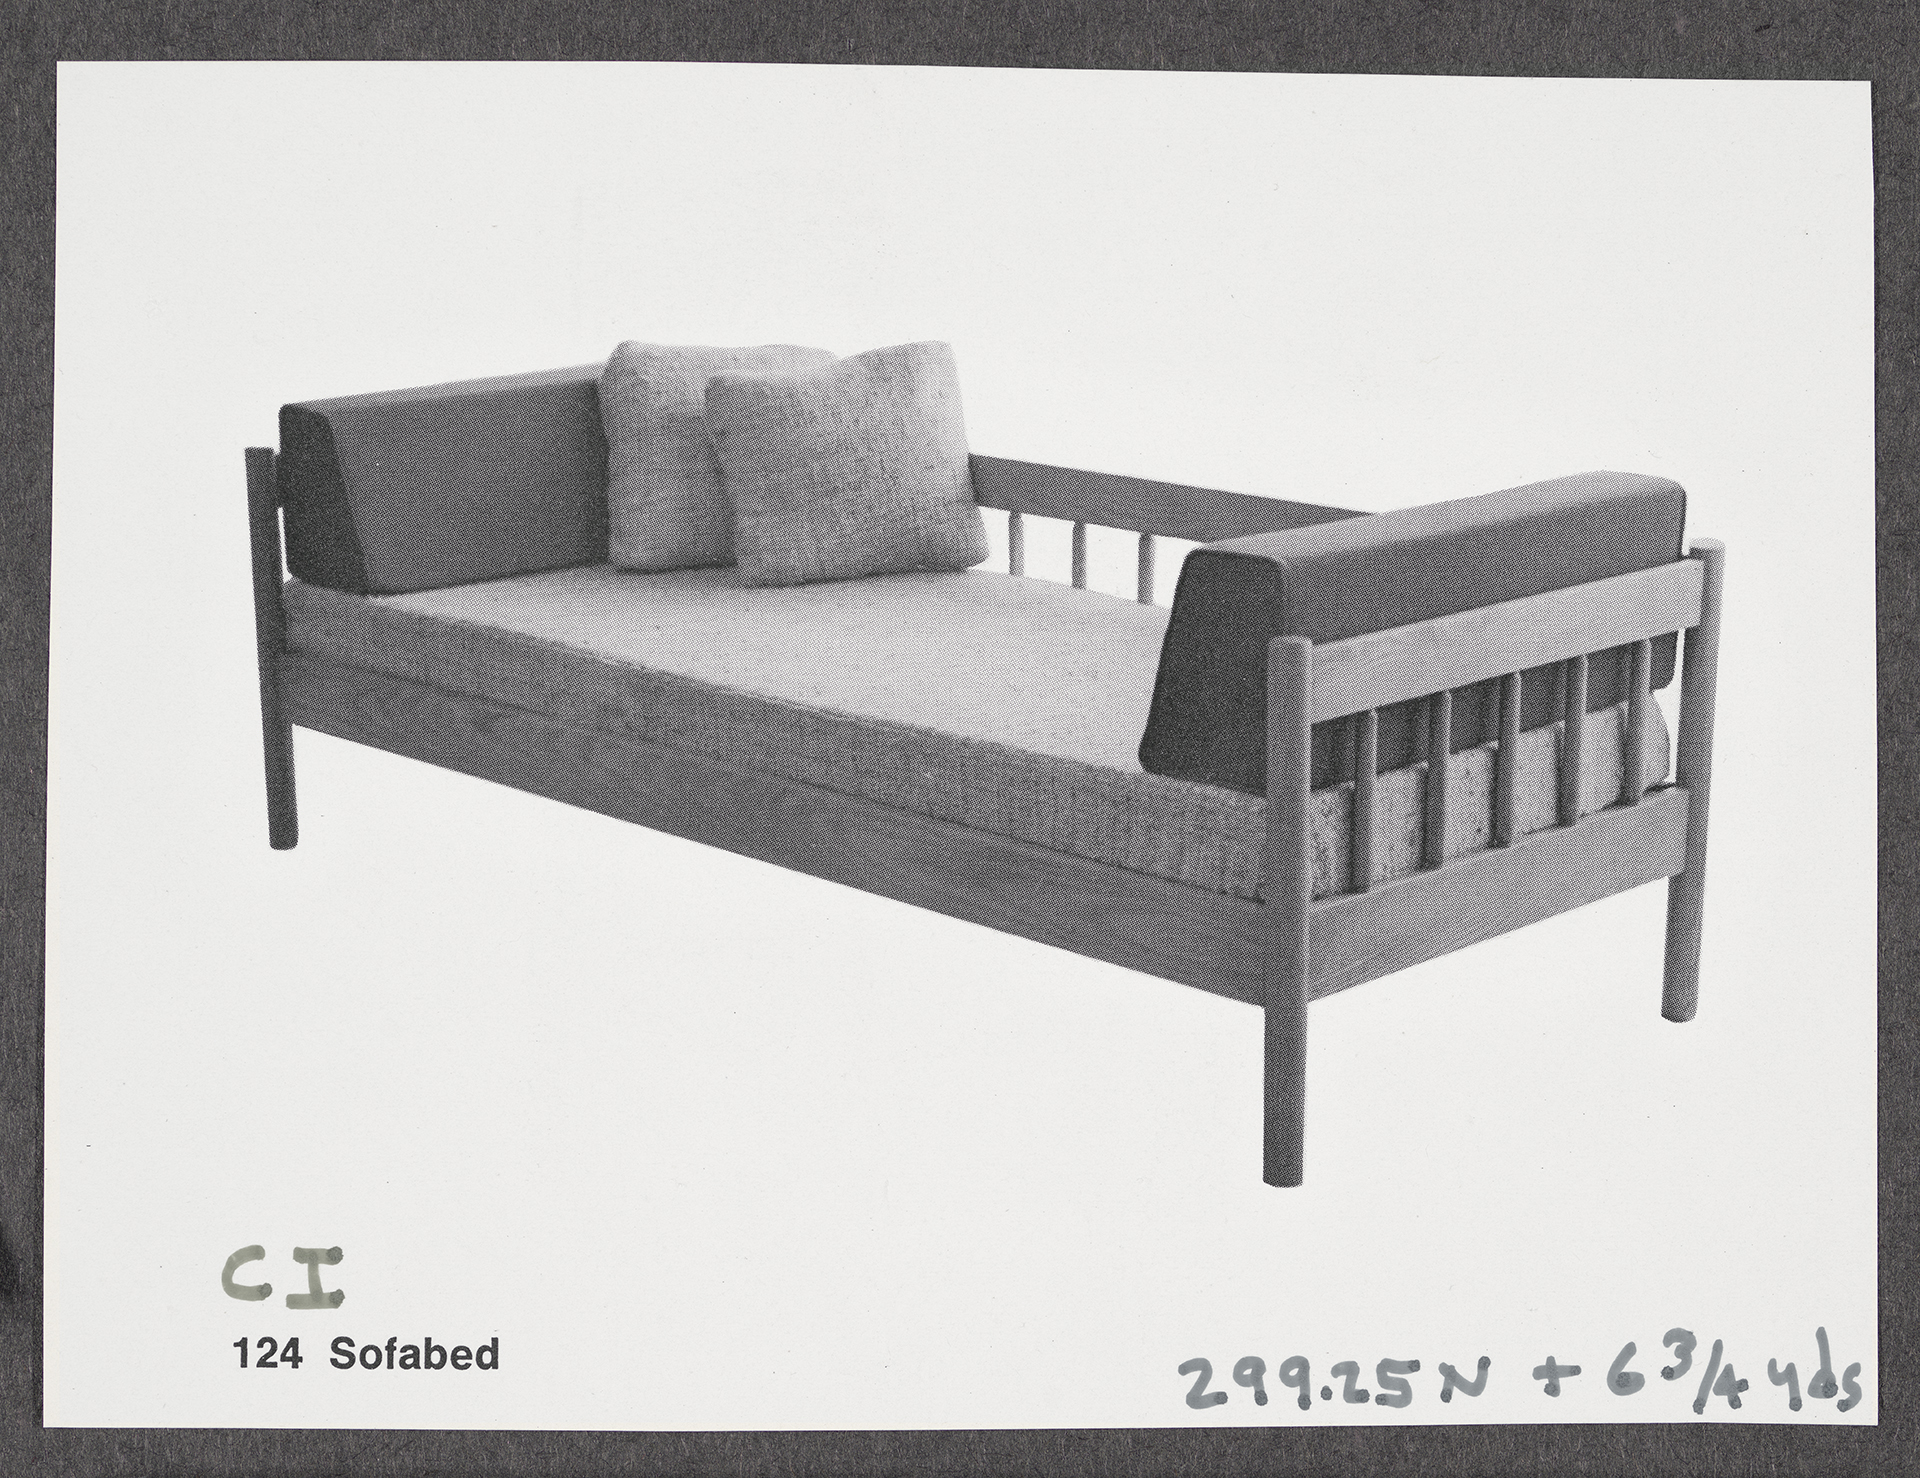 CI Designs, 124 Sofabed, circa 1975, Archives, Yale Center for British Art 